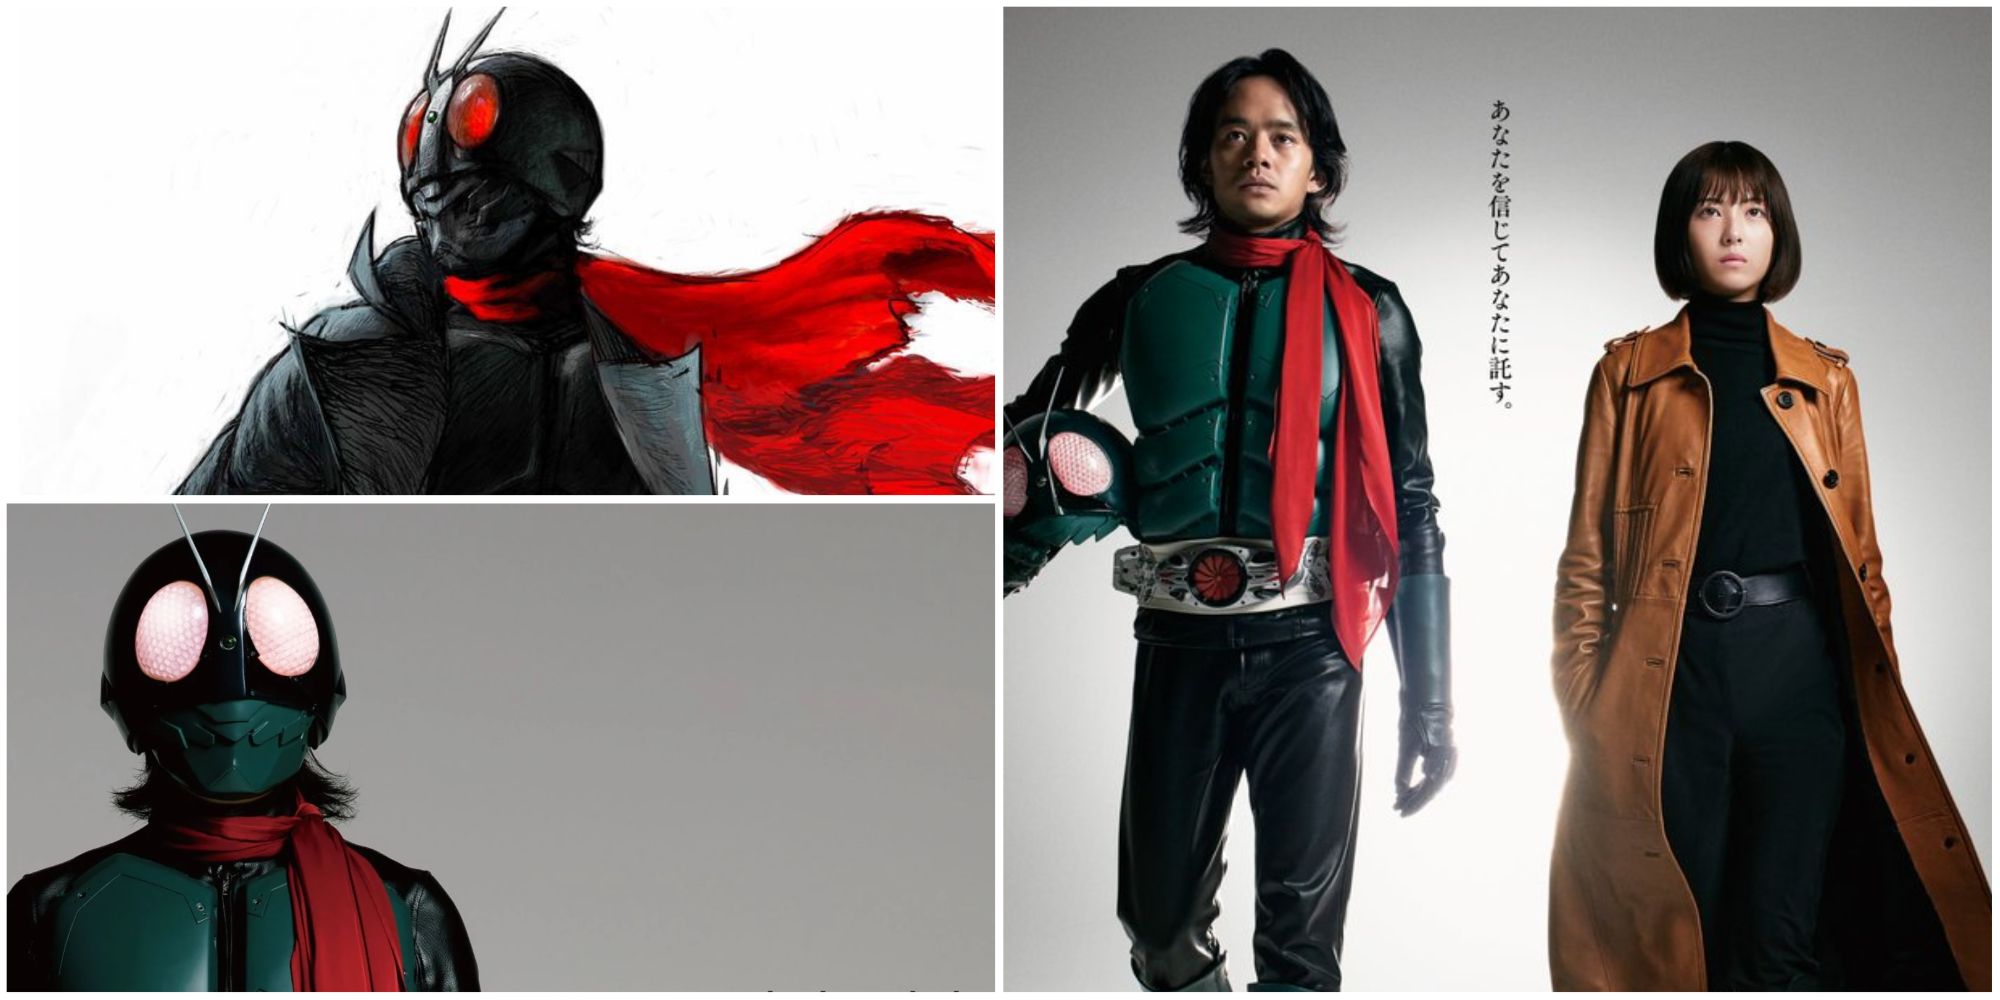 Banner for Shin Kamen Rider featuring images from promotional posters for the film